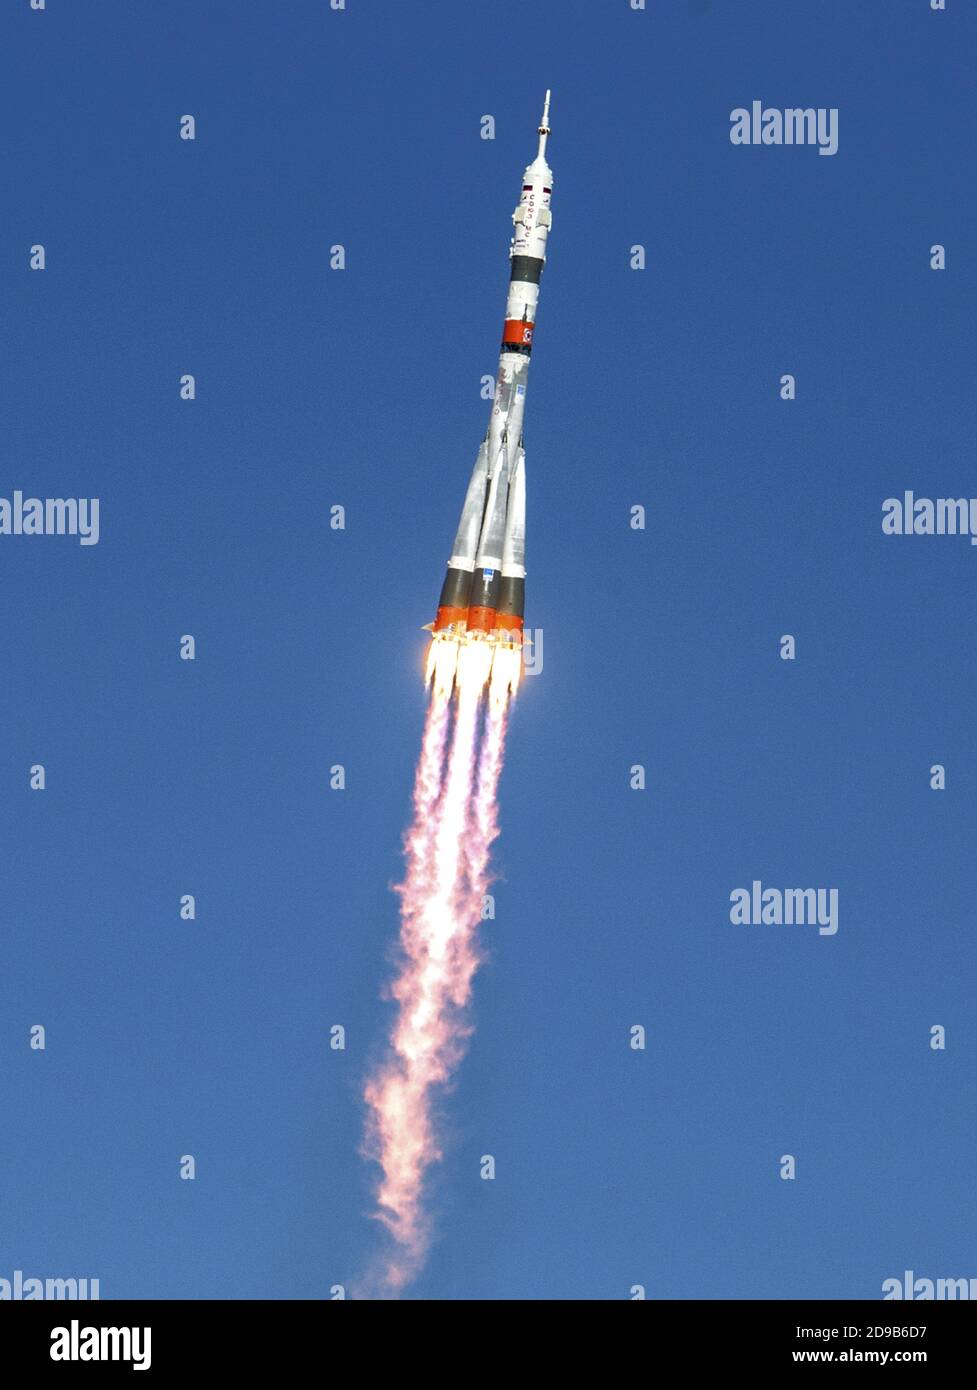 BAIKONUR, KAZAKHSTAN - 14 October 2020 - The Soyuz MS-17 rocket is launched with Expedition 64 Russian cosmonauts Sergey Ryzhikov and Sergey Kud-Sverc Stock Photo